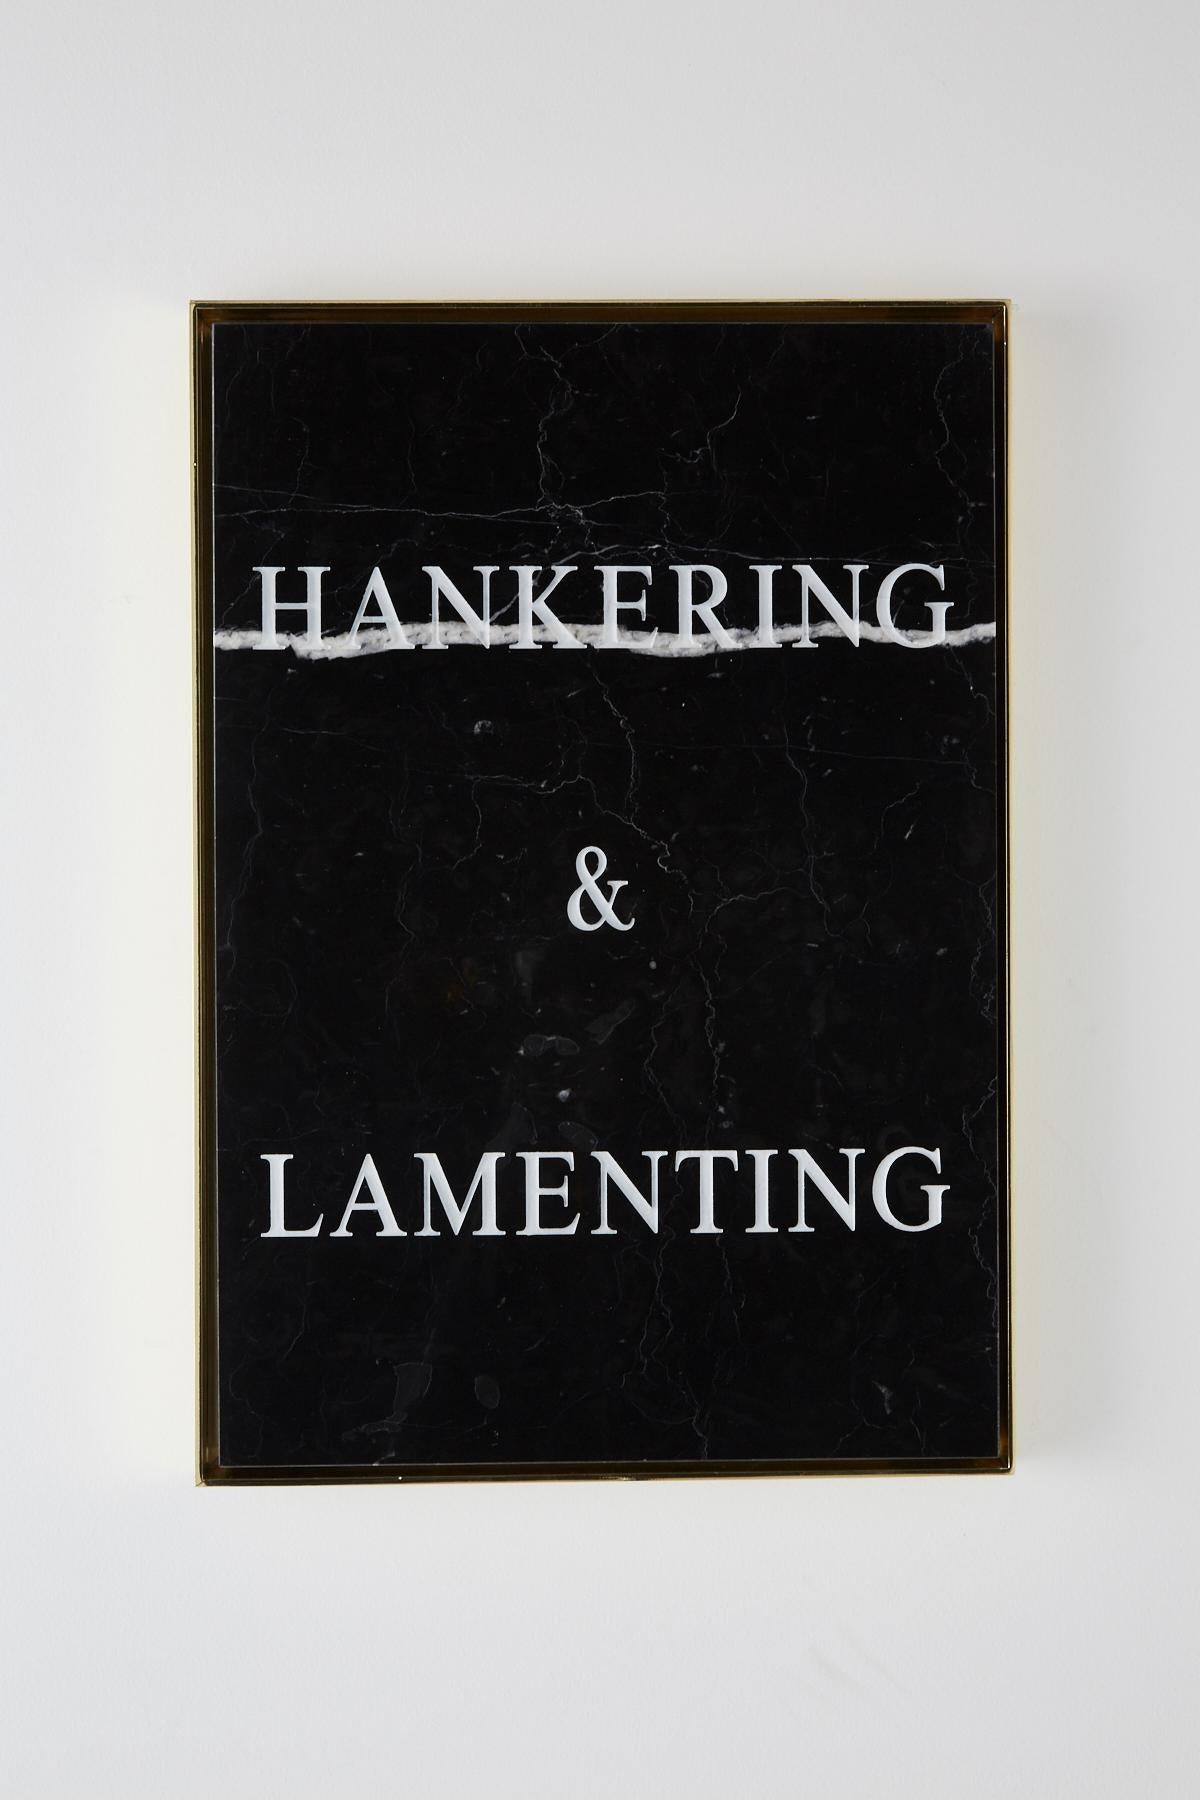 Contemporary wall mounted textual sculpture in Carrara marble and hand made aluminum frame.

"Hankering & Lamenting," 2018
Carrara marble, acrylic paint, plated aluminum frame.
Edition of three (3) + 2 AP.
18 1/8 x 12 5/8 x 1 in.

Nimai Kesten was